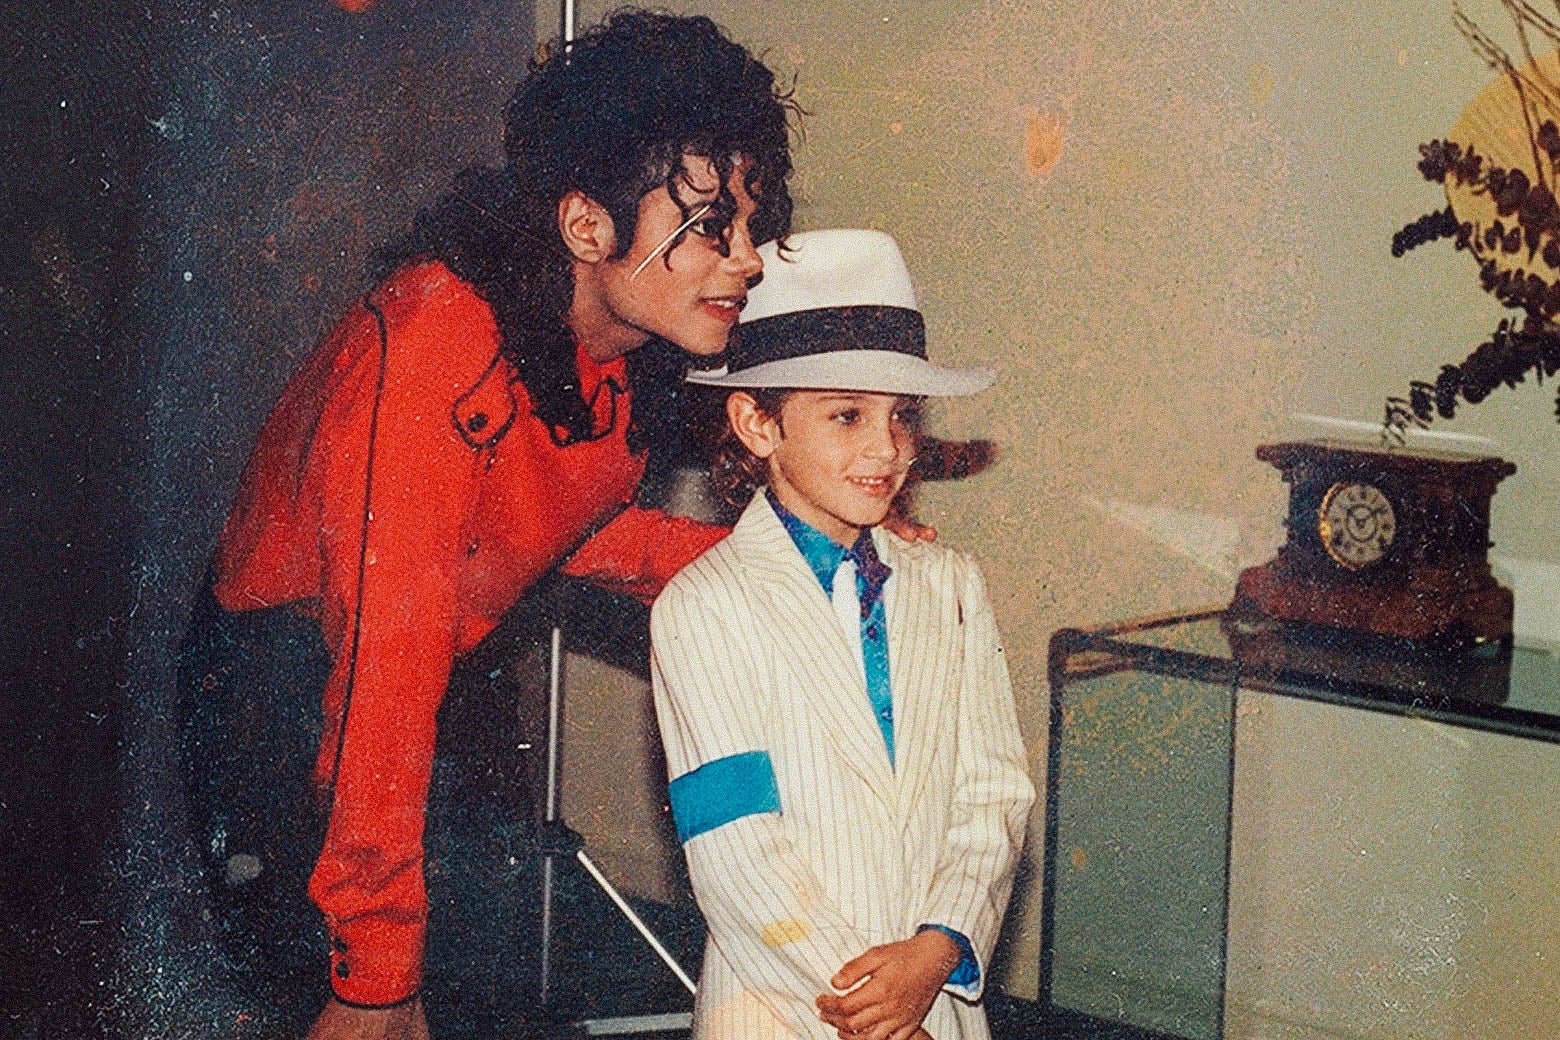 leaving neverland review